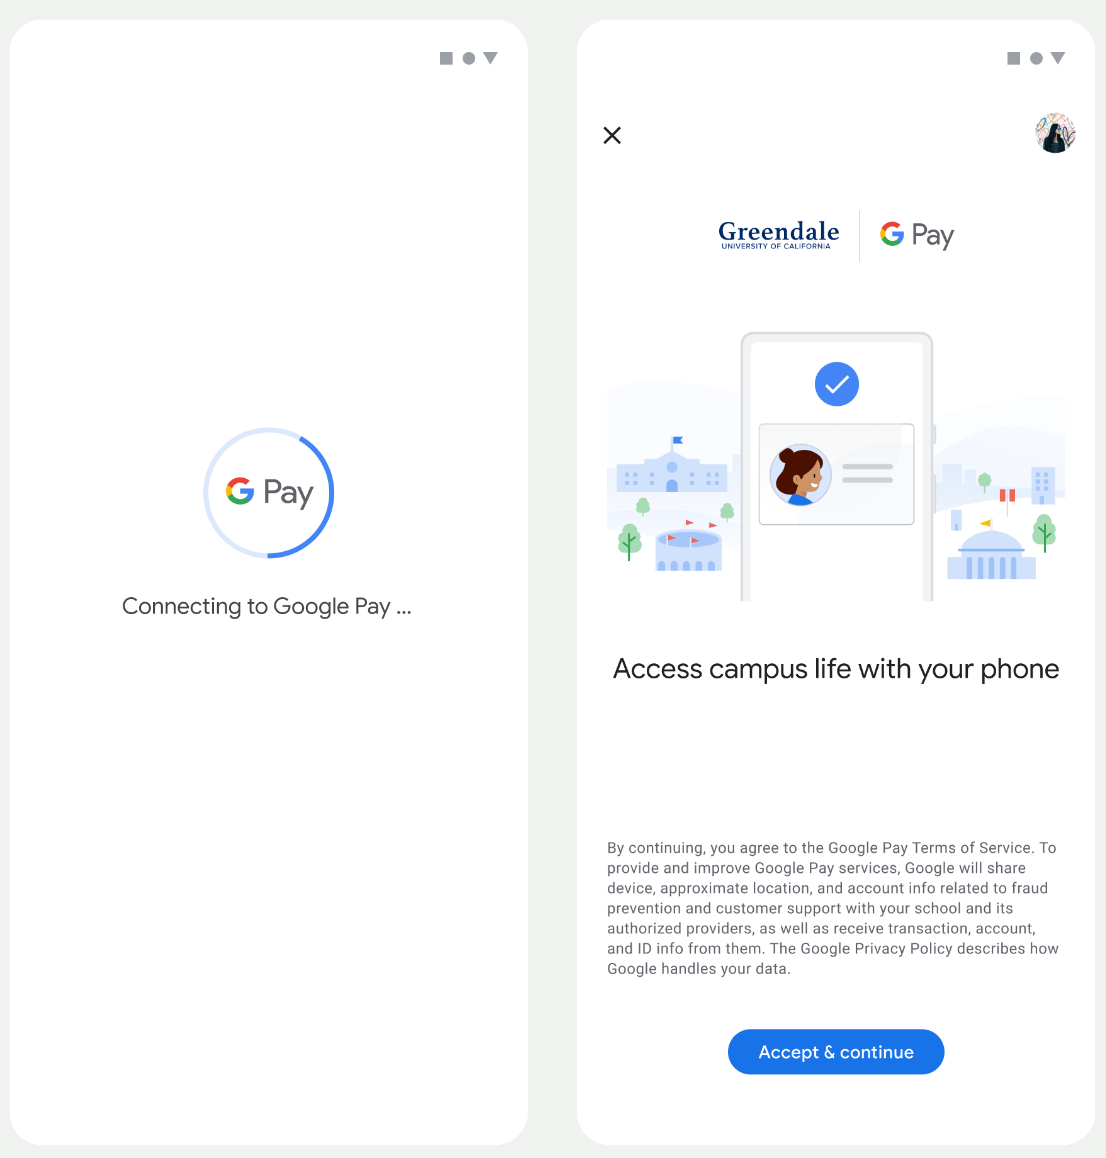 In first screen, the app connects to Google Wallet. In
       the second screen, the user accepts the Terms of Service and continues.